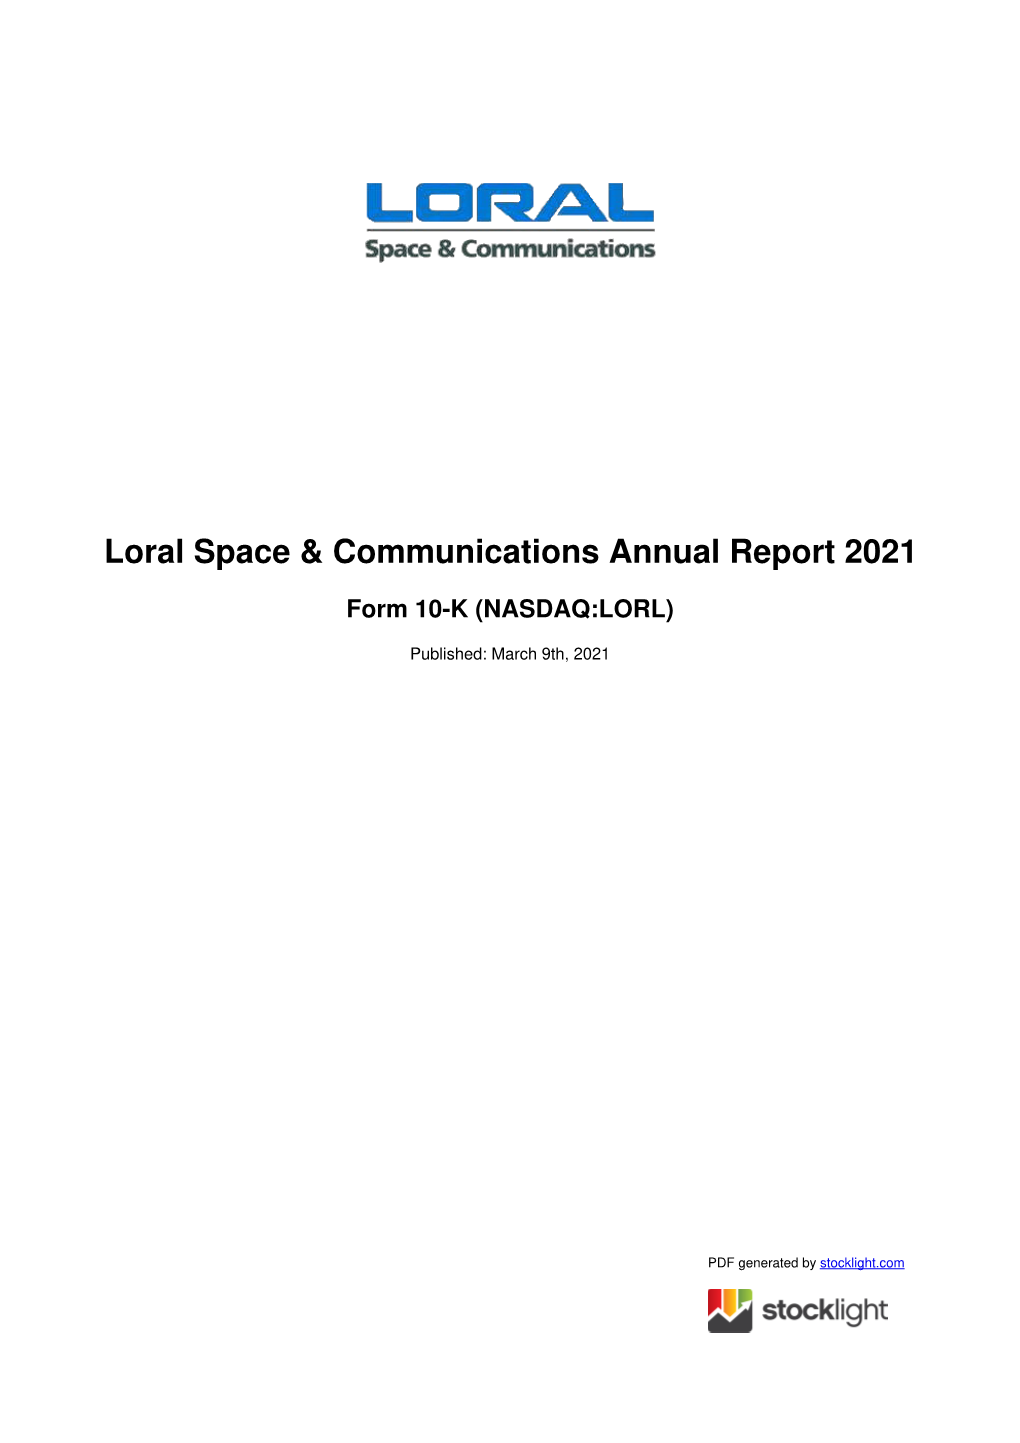 Loral Space & Communications Annual Report 2021